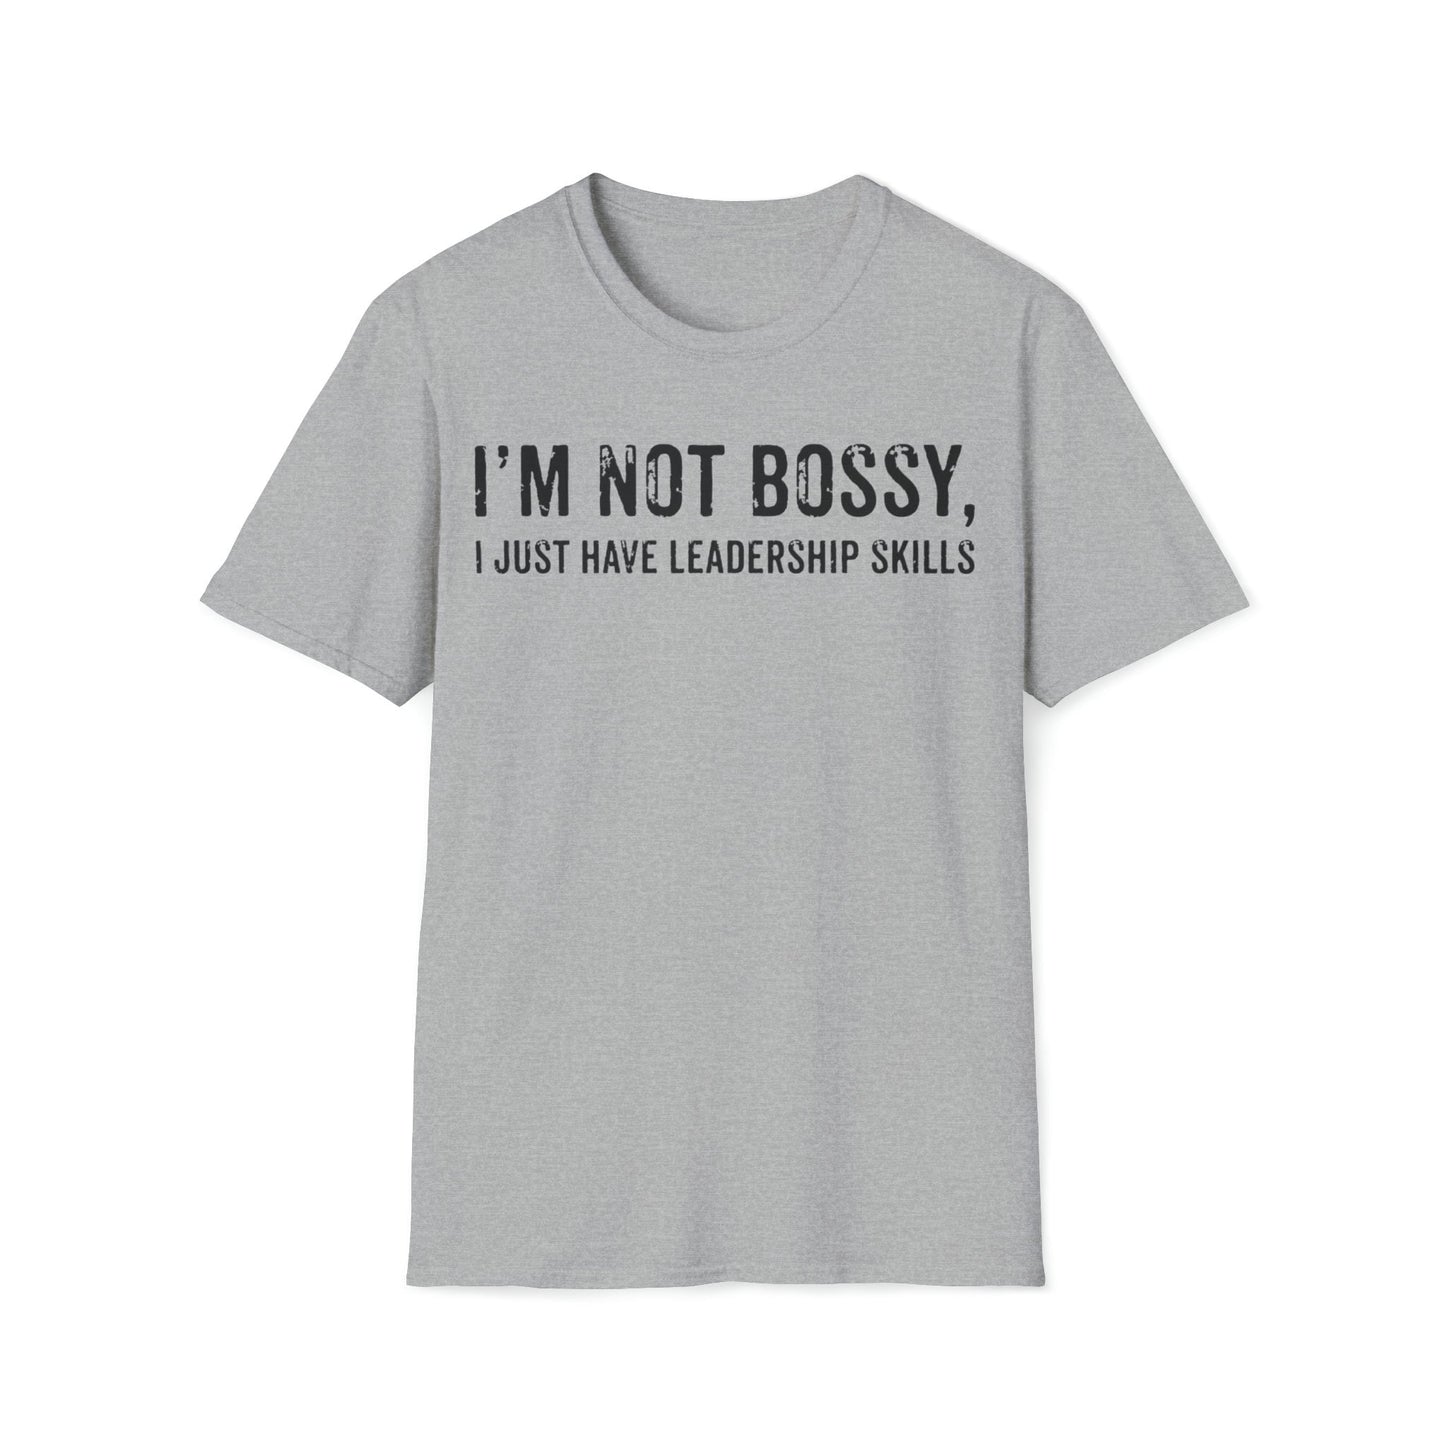 I'm Not Bossy, I Just Have Leadership Skills - Strong Women - Best Mom - Celebrate Mom - Strong Woman - Mom Humor - Unisex Softstyle T-Shirt